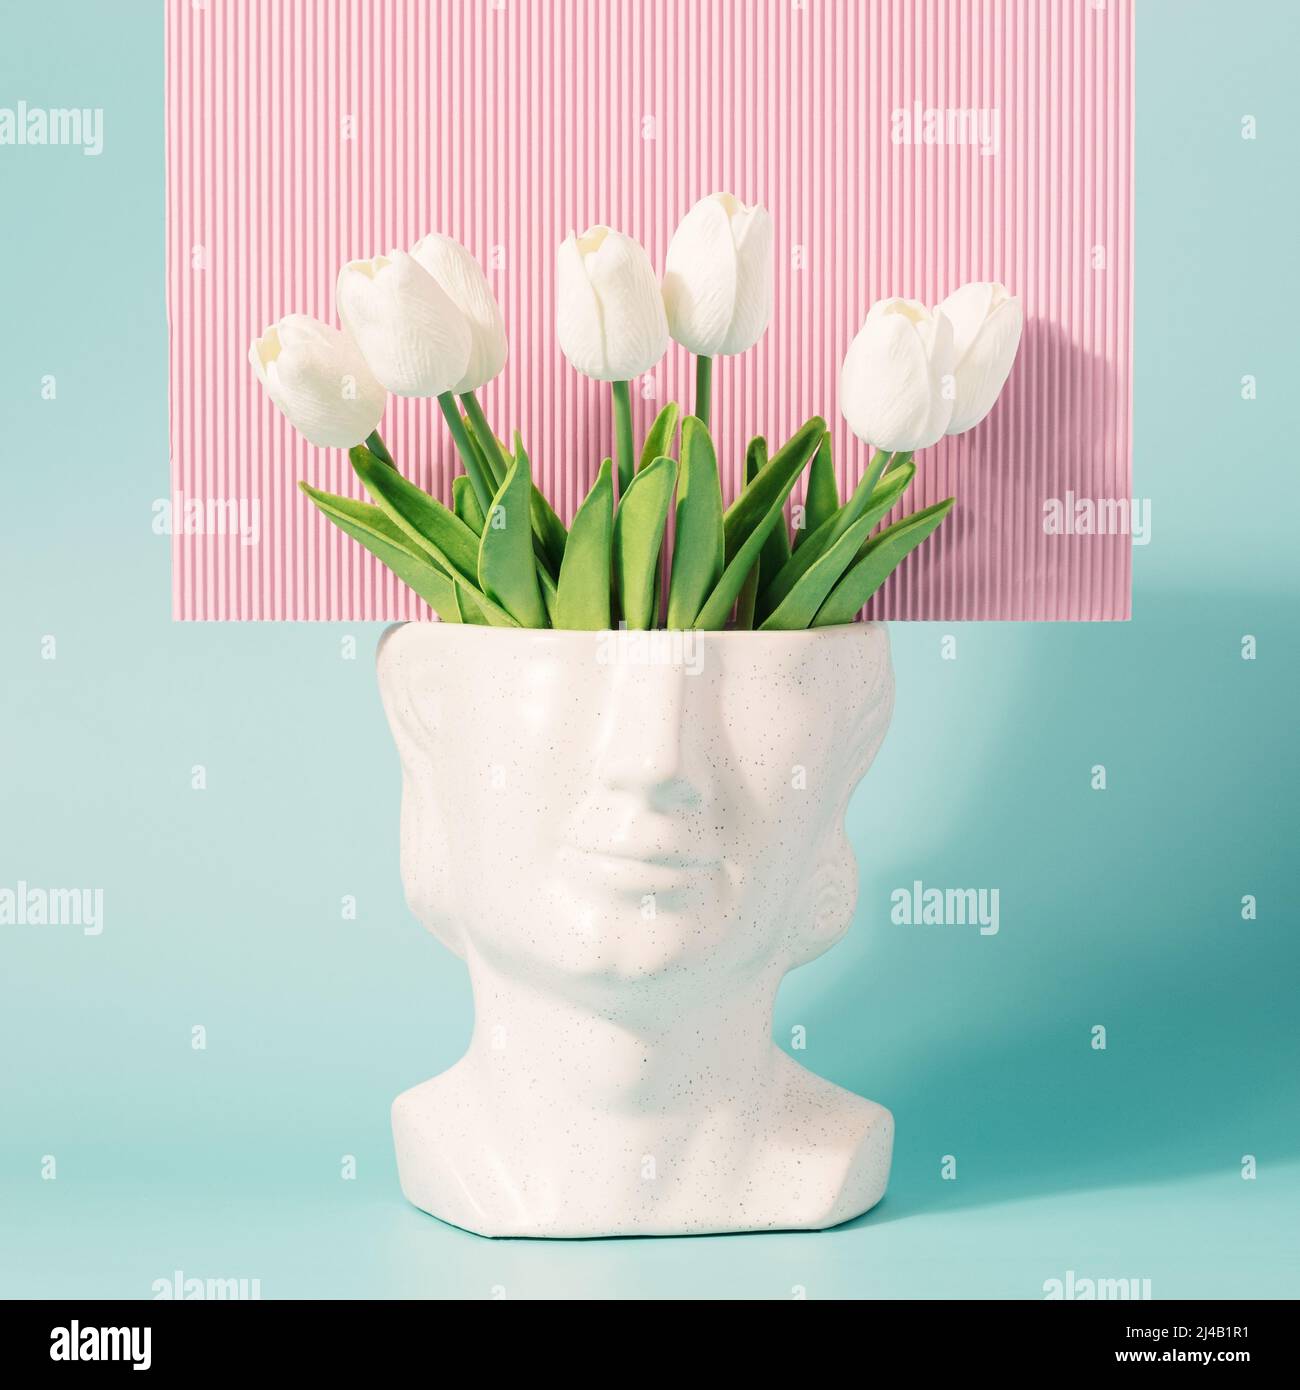 Retro head sculpture with tulip flowers on a pastel blue pink background. Spring, summer retro wave concept. Stock Photo